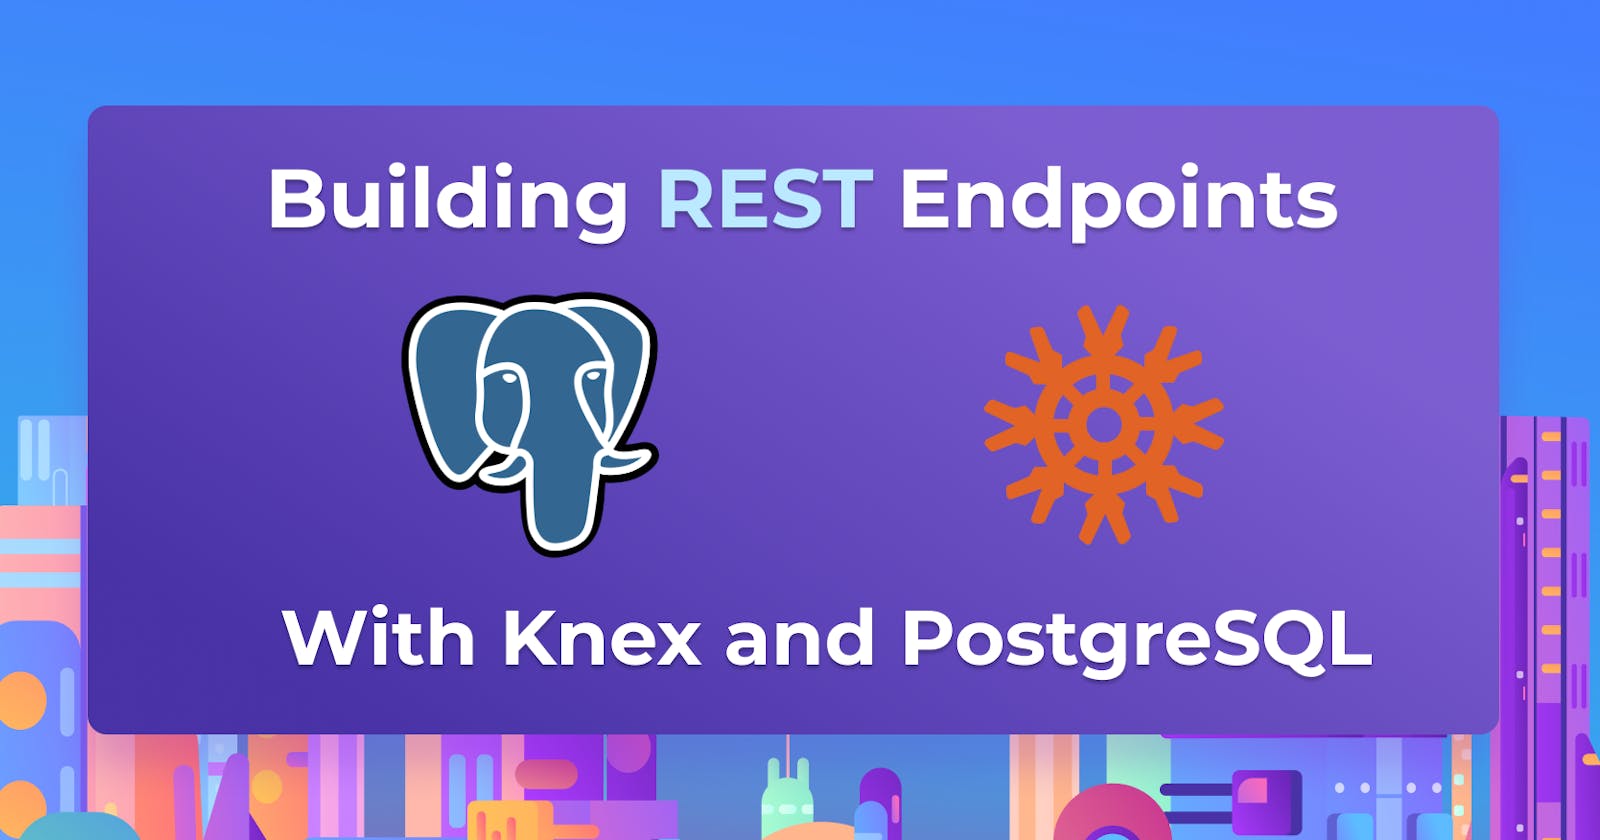 Building REST Endpoints with Knex and PostgreSQL